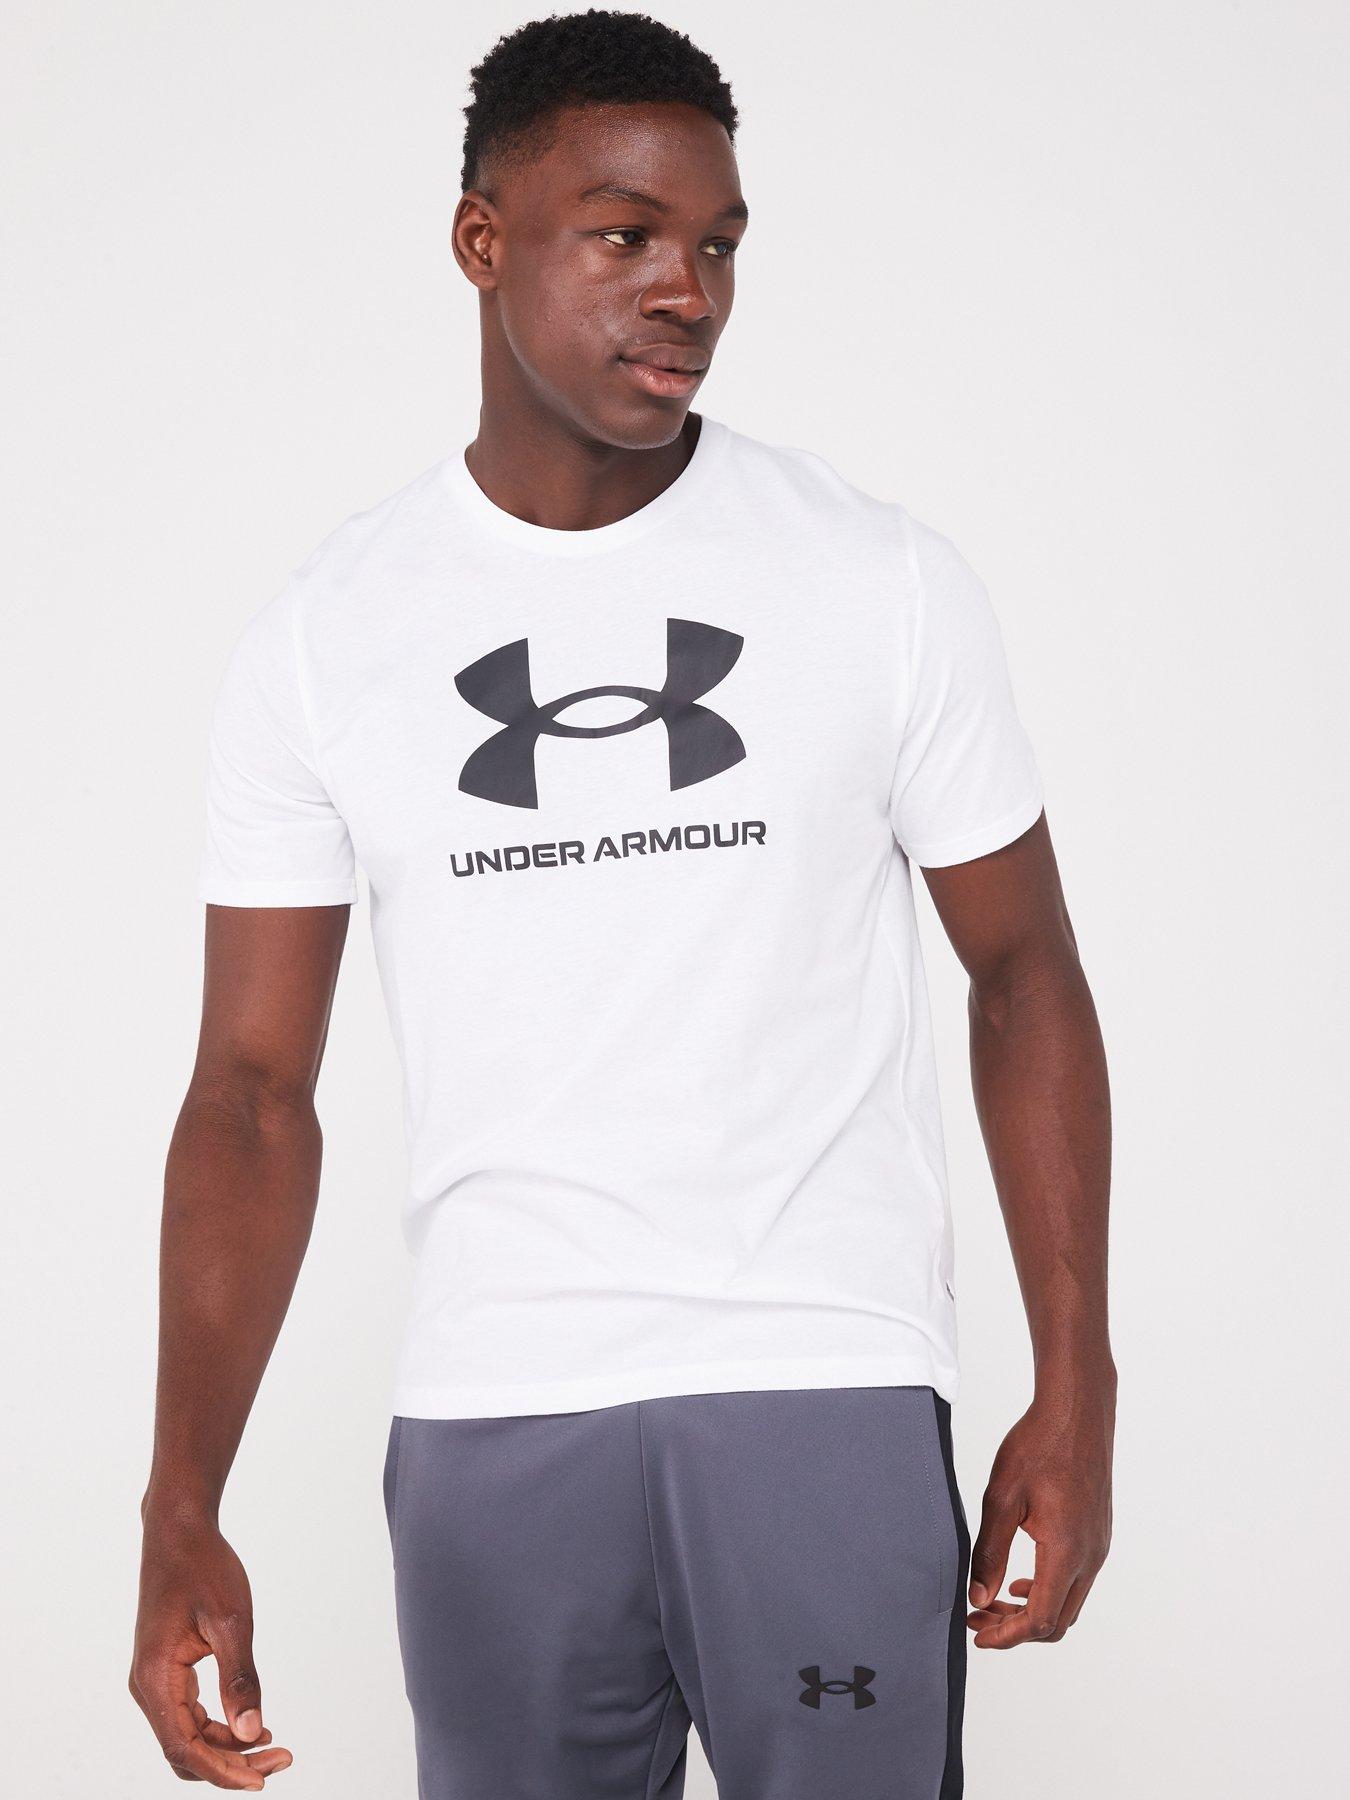 Men's UNDER ARMOUR T-Shirts & Golf Polo Shirts